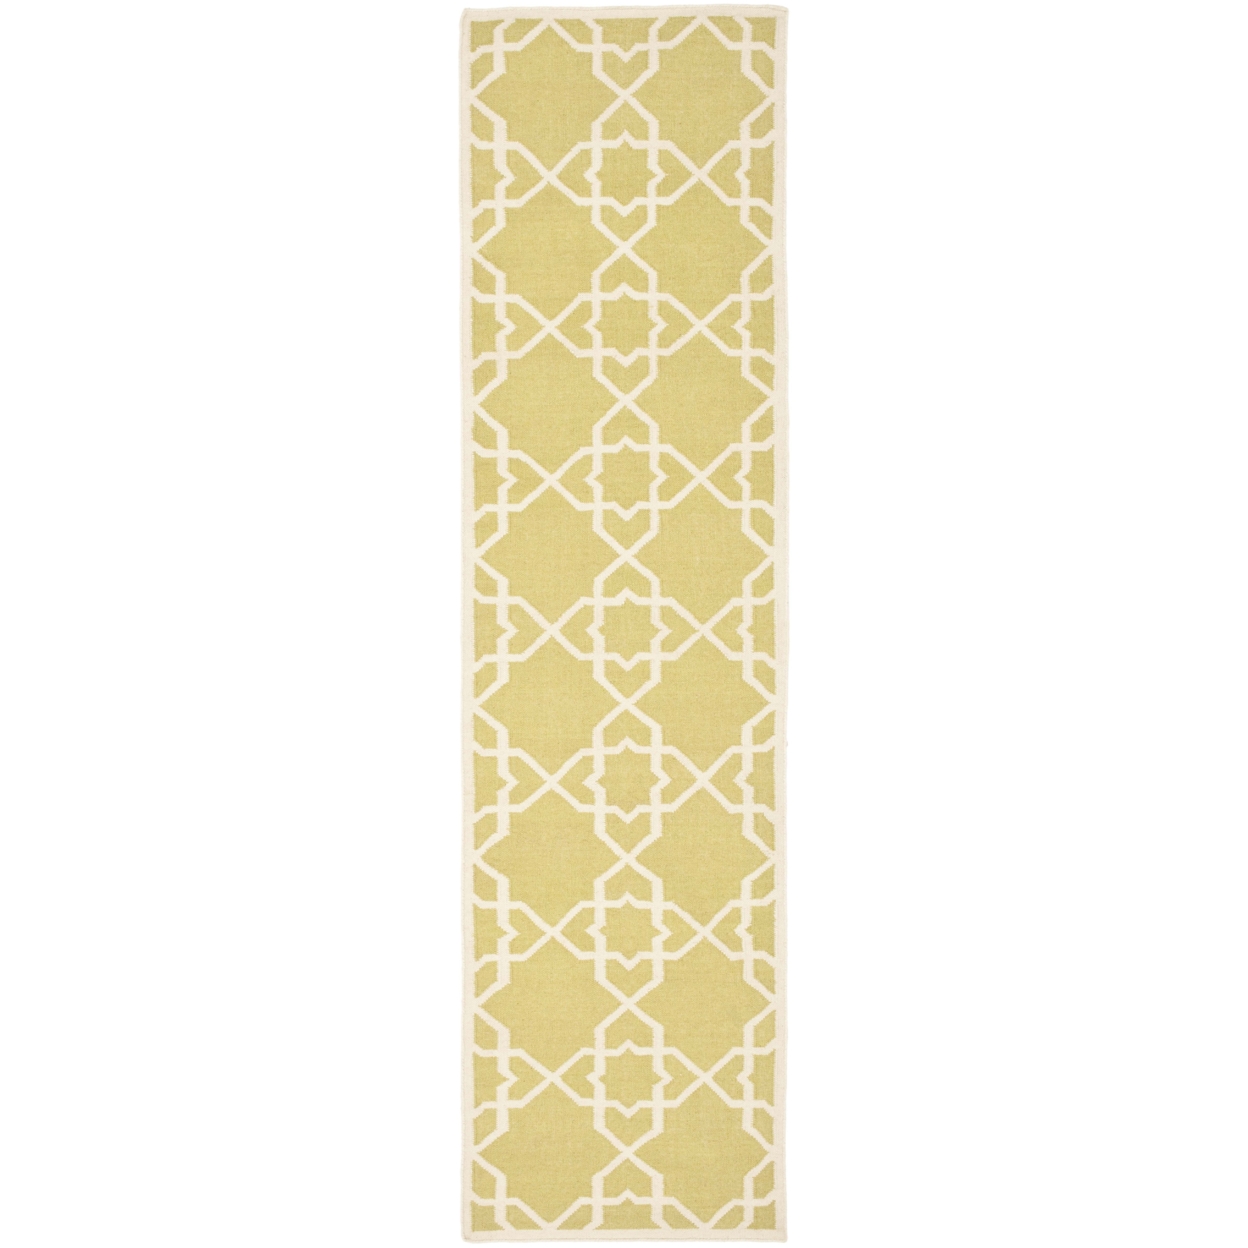 SAFAVIEH Dhurries DHU548A Handwoven Olive / Ivory Rug - 2' 6 X 10'